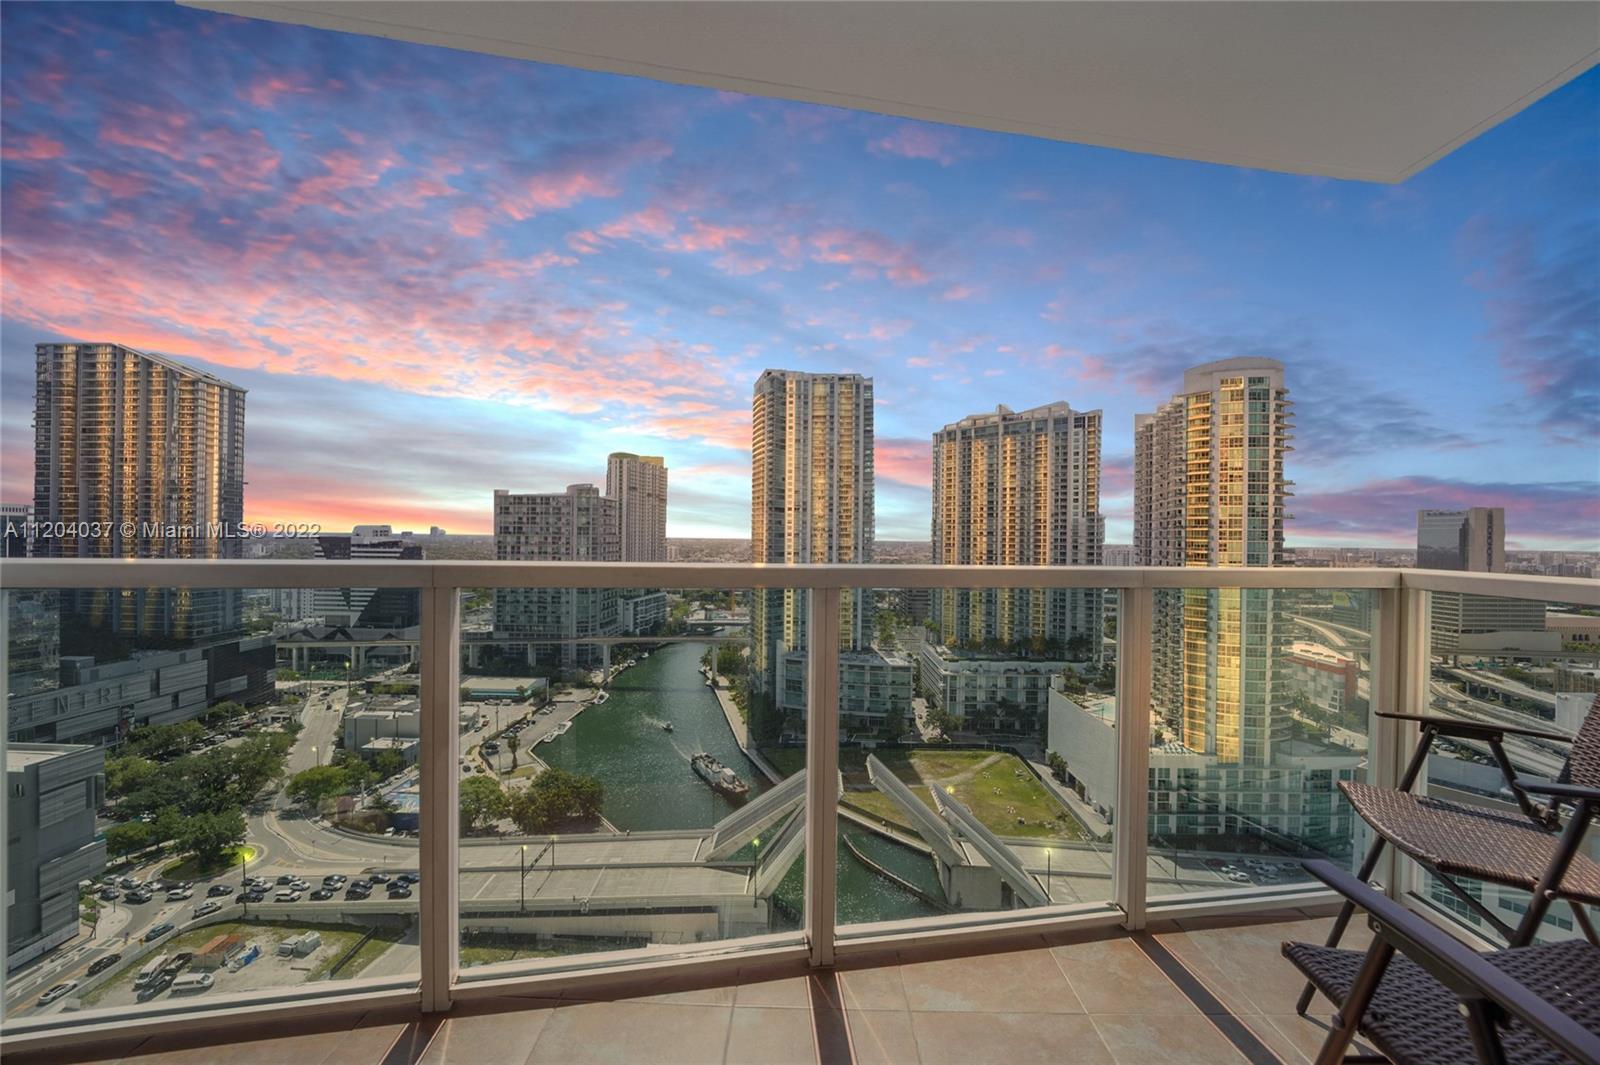 Brickell's BEST location! Directly on the iconic Miami River! Spacious 1-bedroom high up on the 30th